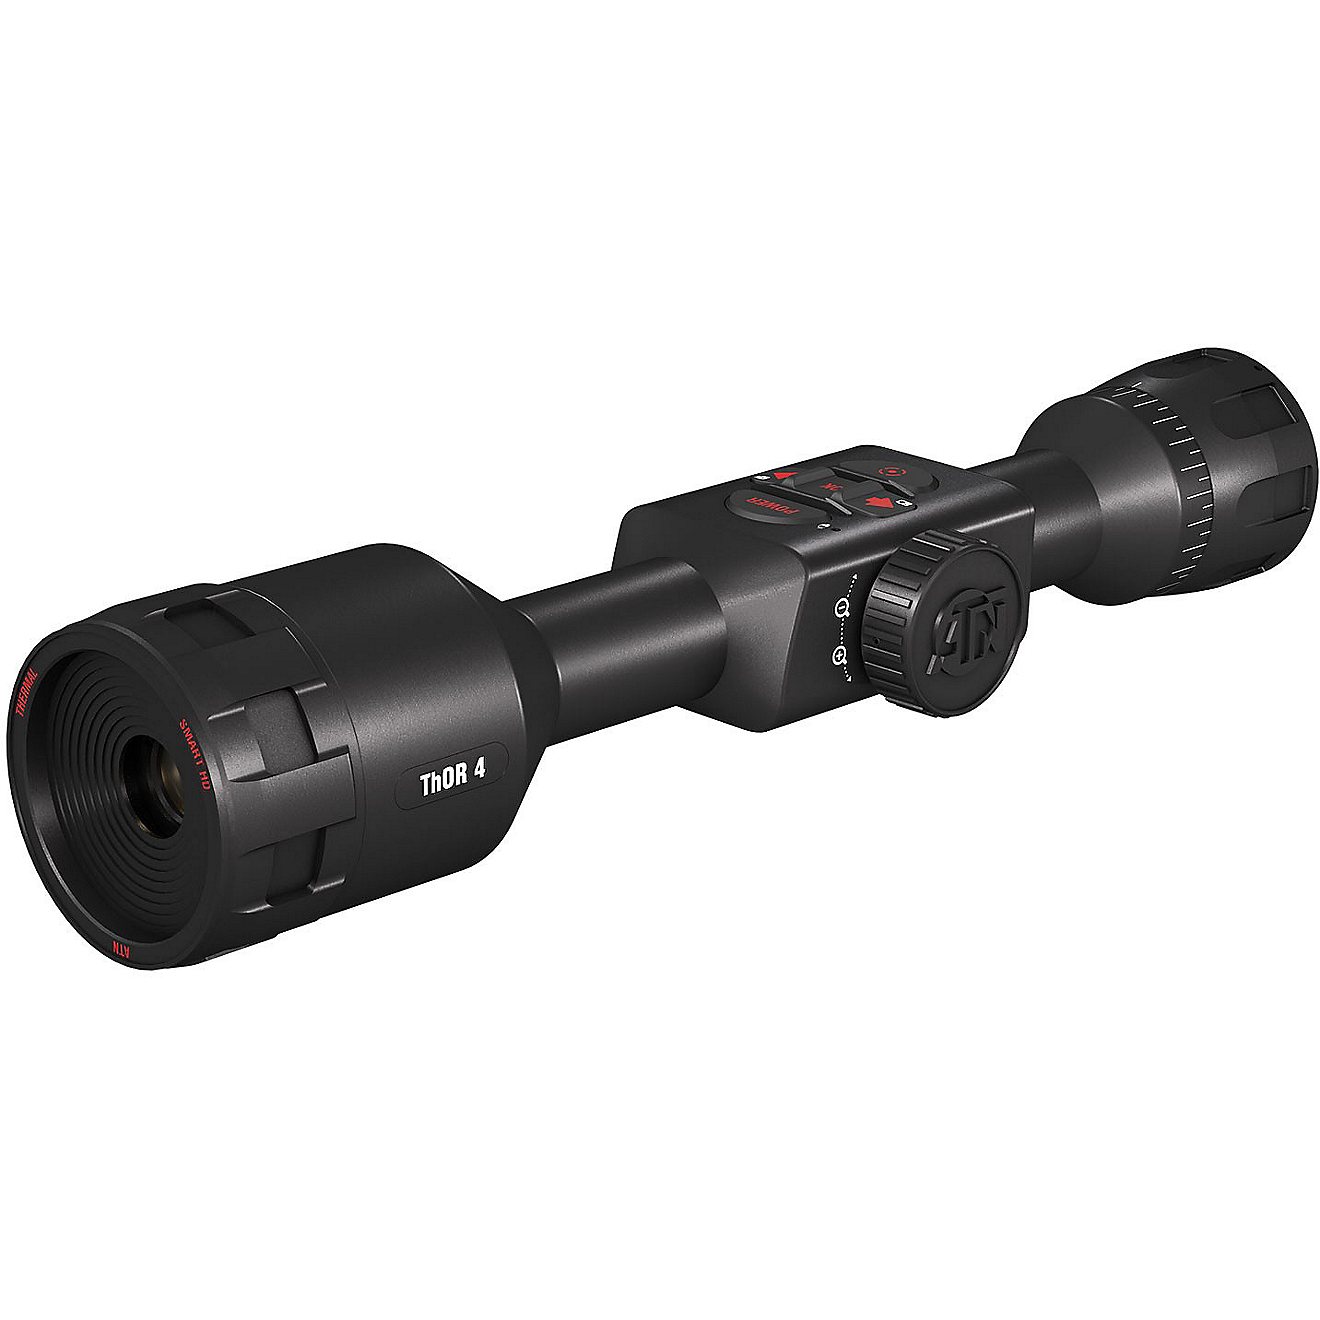 ATN Thor 4 640 HD 1.5 - 10 x 19 Thermal Riflescope                                                                               - view number 1